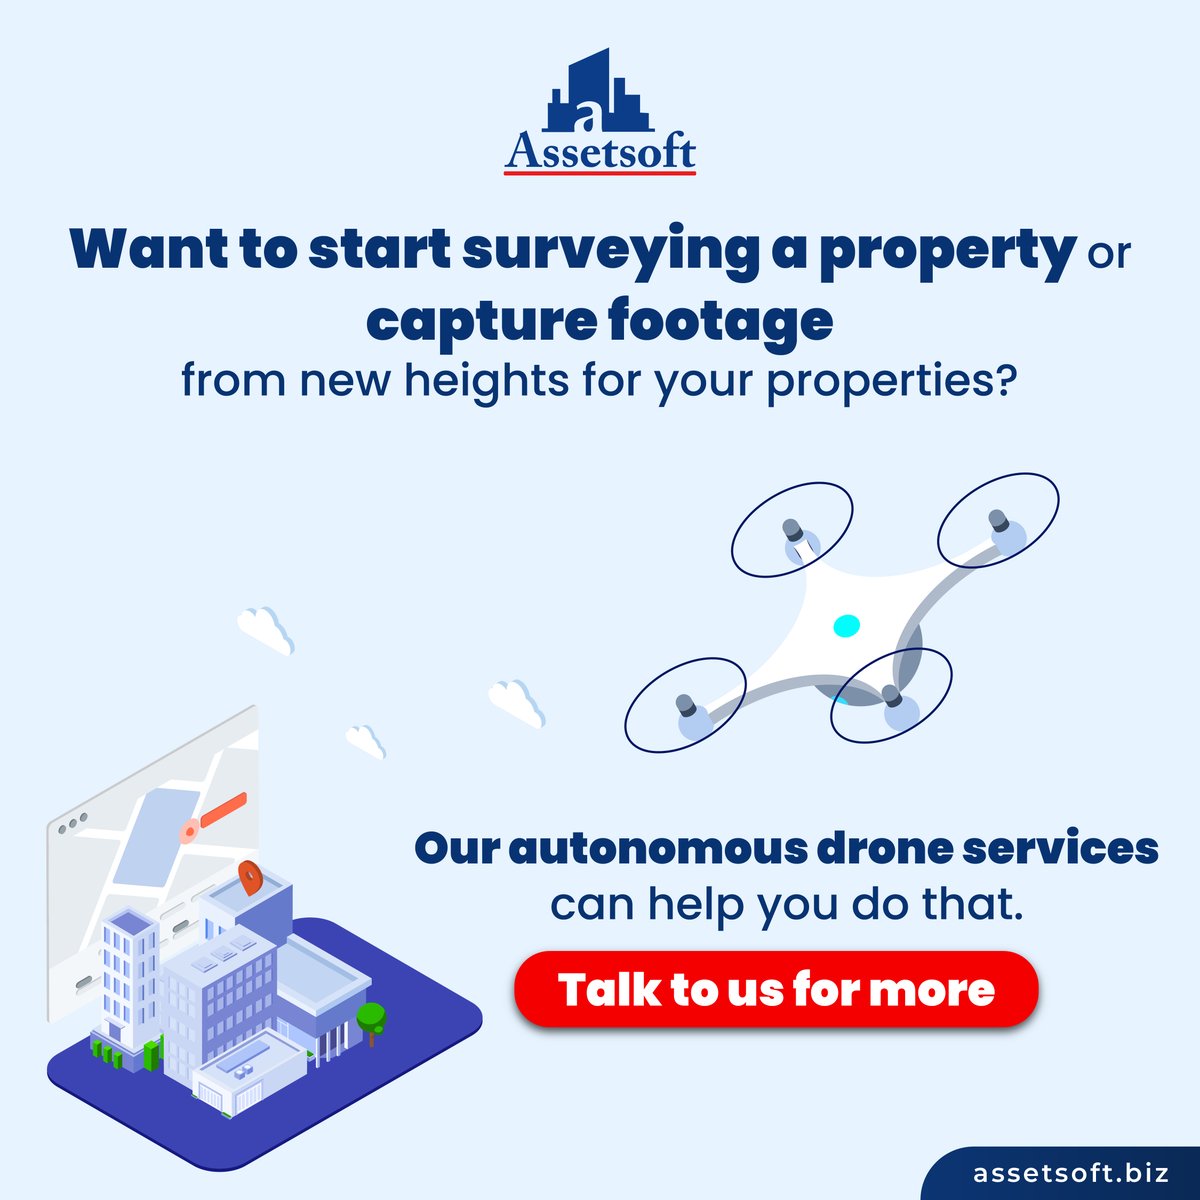 Our Autonomous Drones are revolutionizing real estate inspections and surveys. Experience efficiency like never before! ➡️ Learn More at zurl.co/nQAb #Assetsoft #AutonomousDrones #PropTech